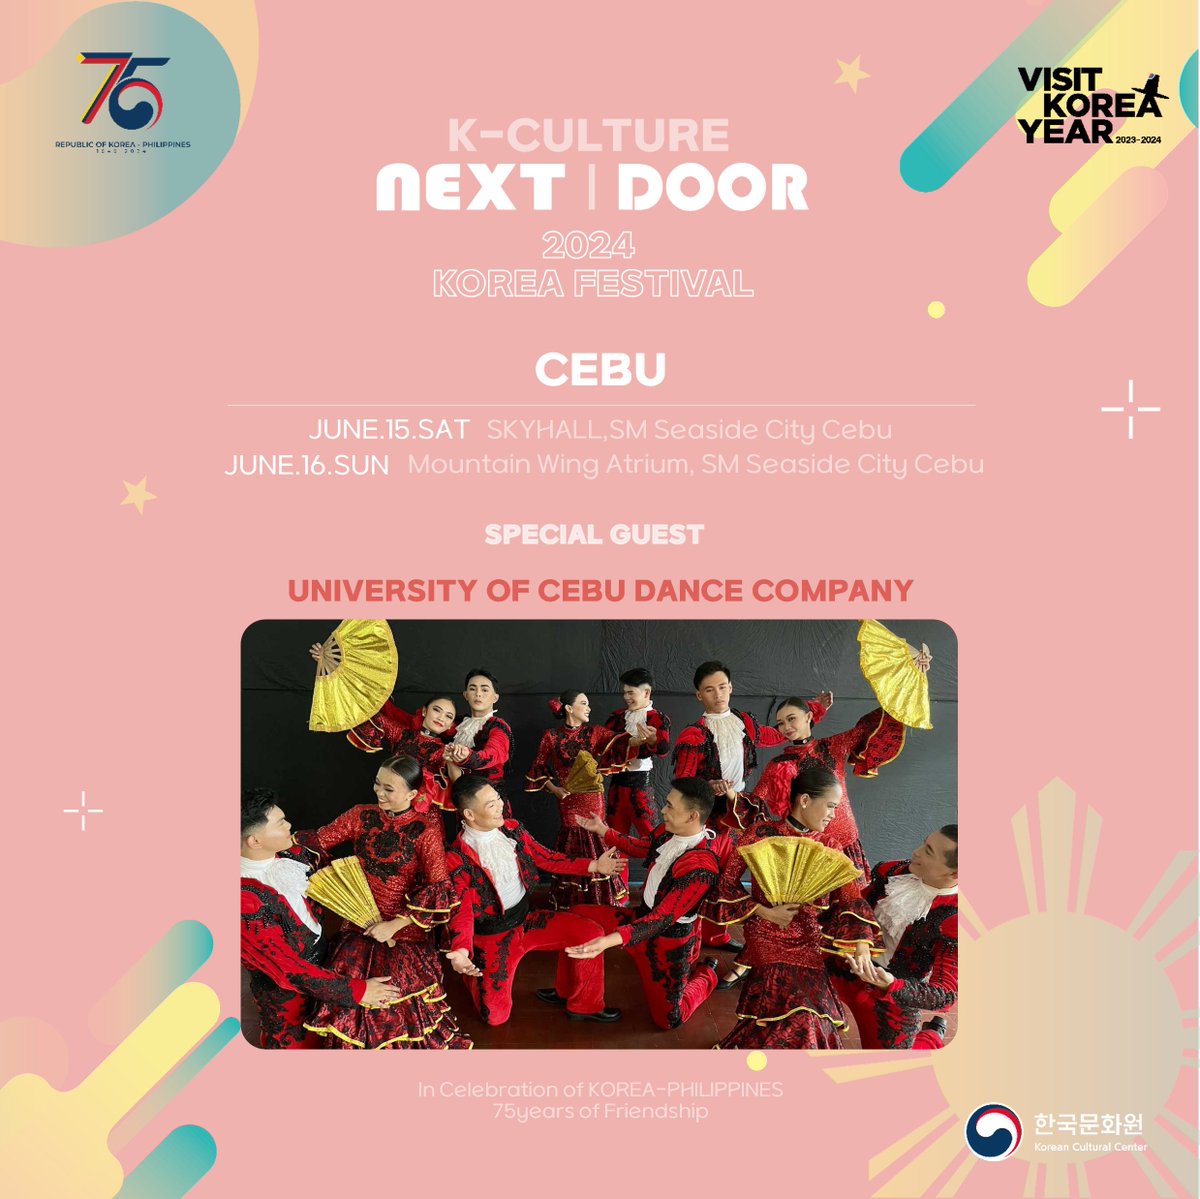 To also highlight our very own culture and celebrate the friendship between Cebu and Jeju, THE UNIVERSITY OF CEBU DANCE COMPANY will perform a showcase of traditional Filipino dances. June 15, 2024 2:00 PM at the SkyHall of @SMSeasideCebu